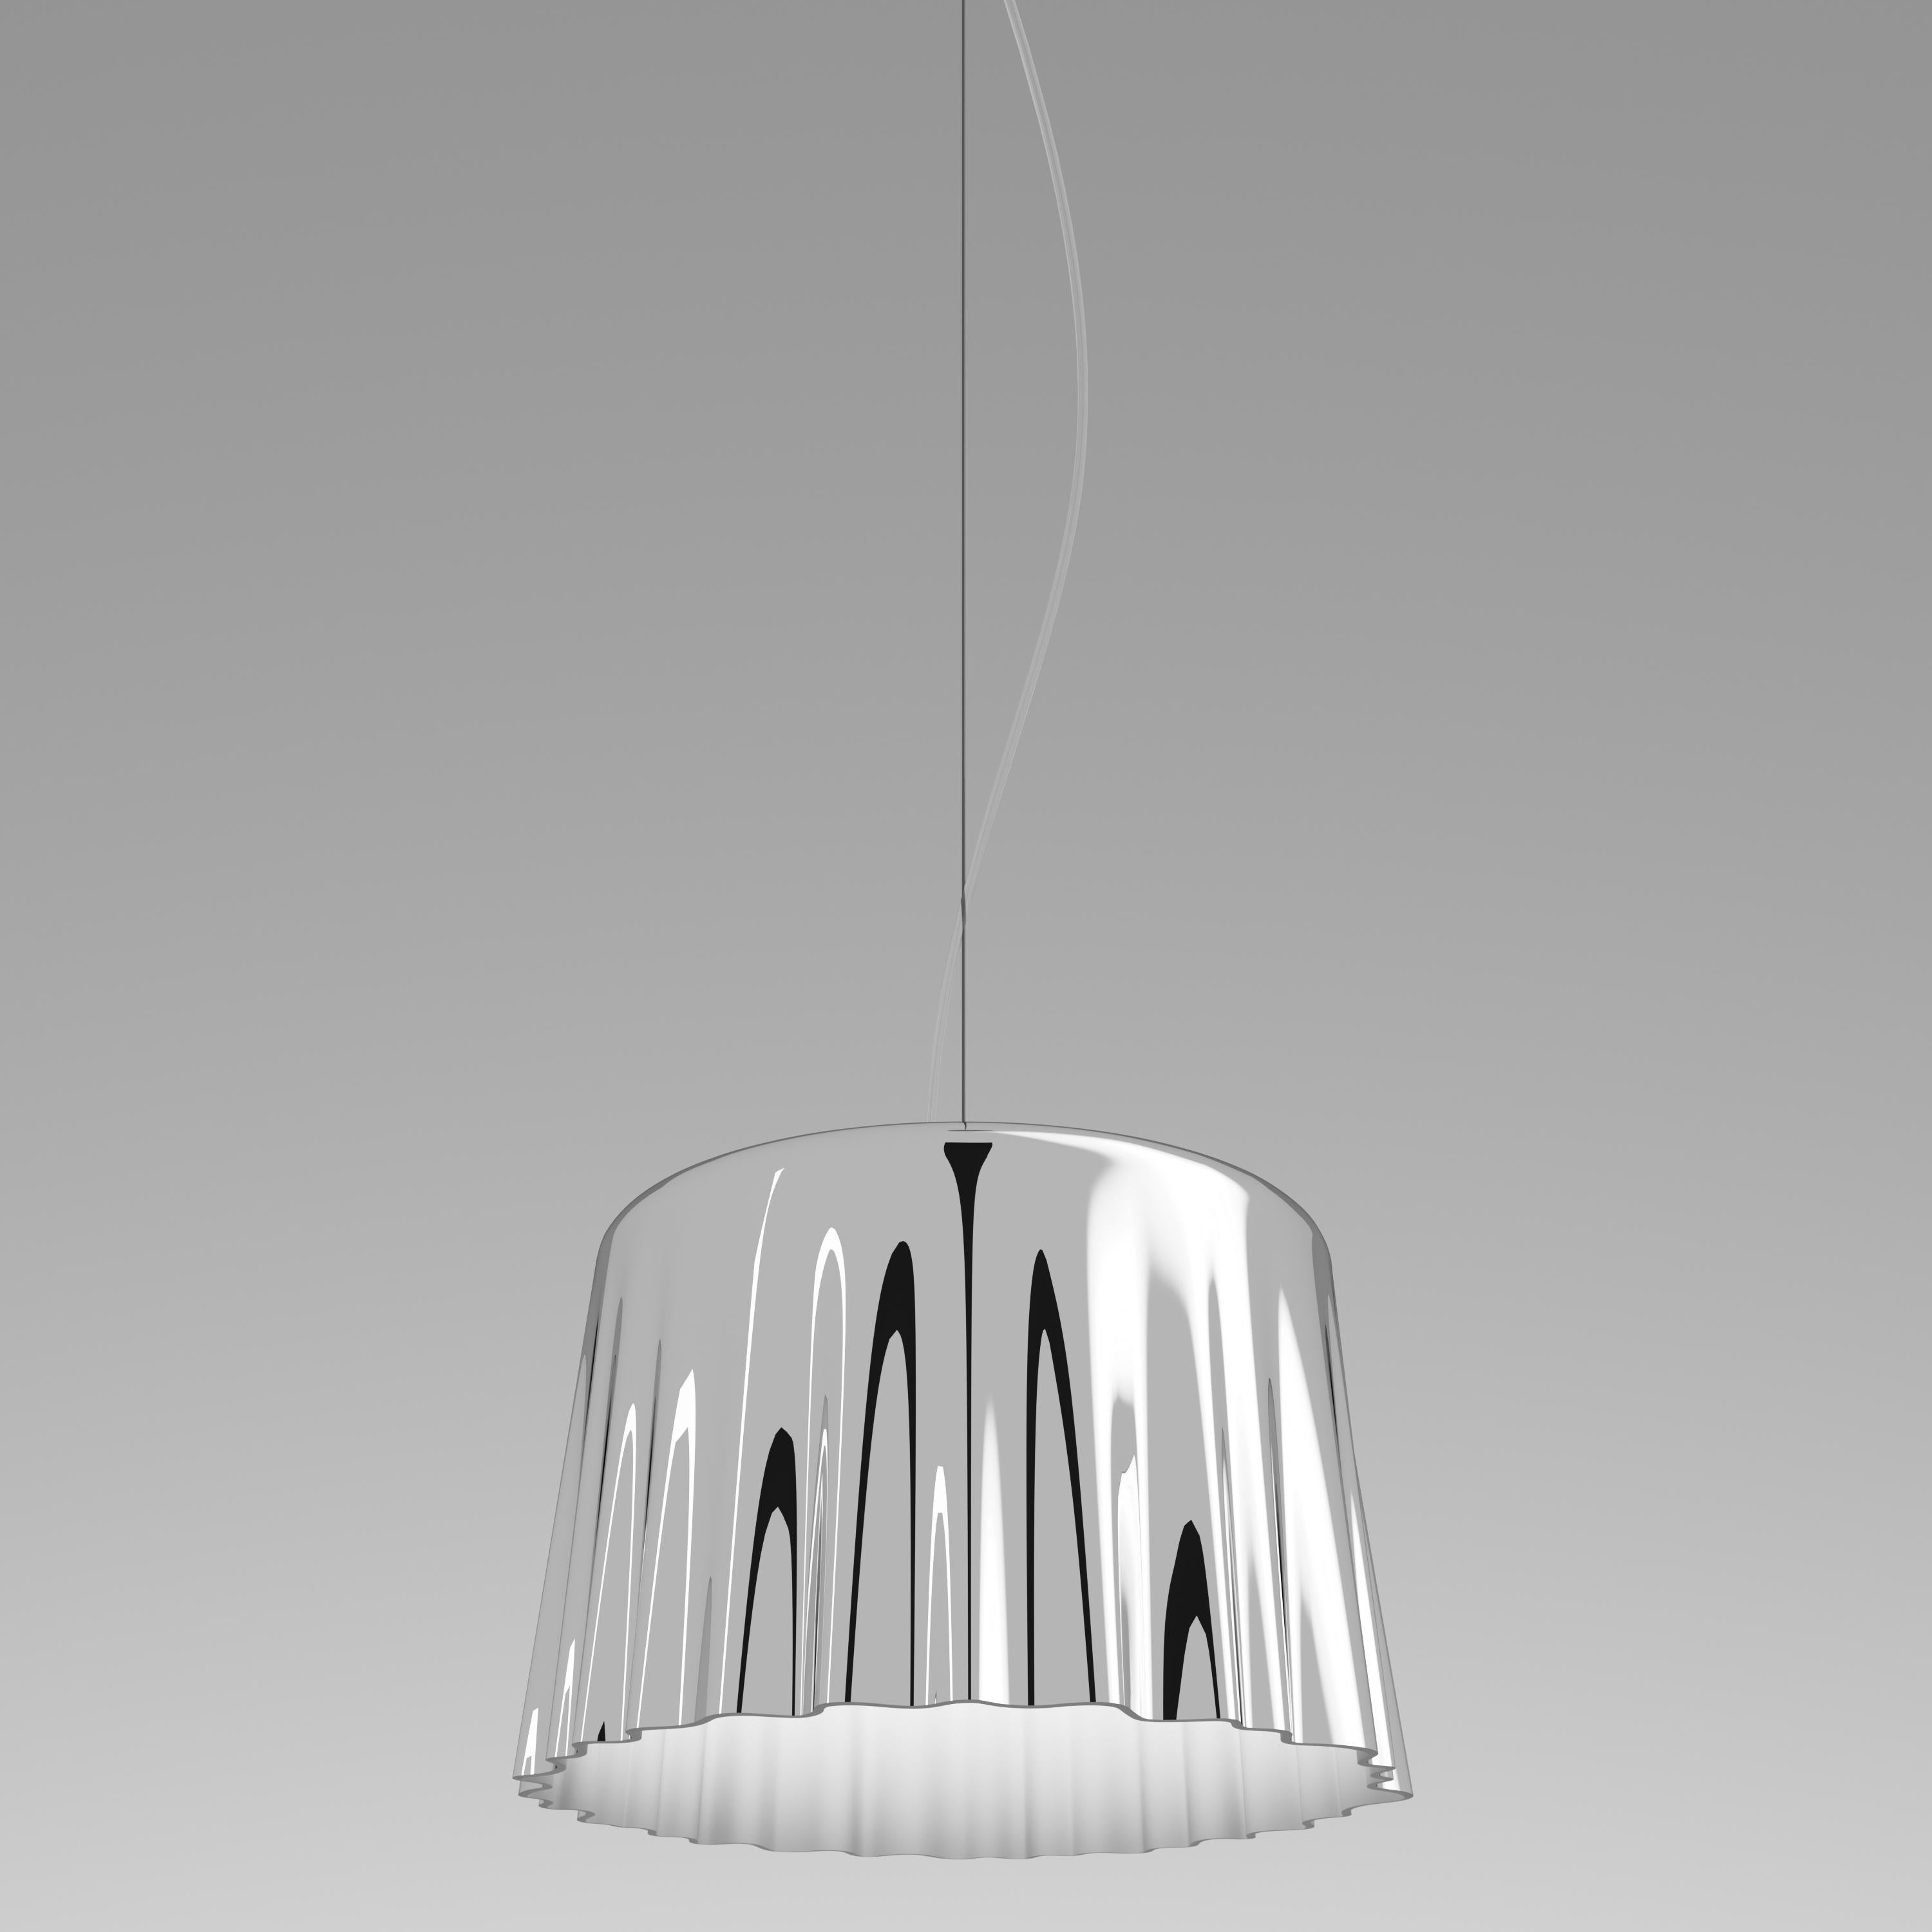 The Cloth collection is characterized by a unique blown glass technique that seems to turn the solid shade into pleated fabric. Featured pendant light in white and chrome. The chrome version has an exclusive outer chrome coating in white that looks